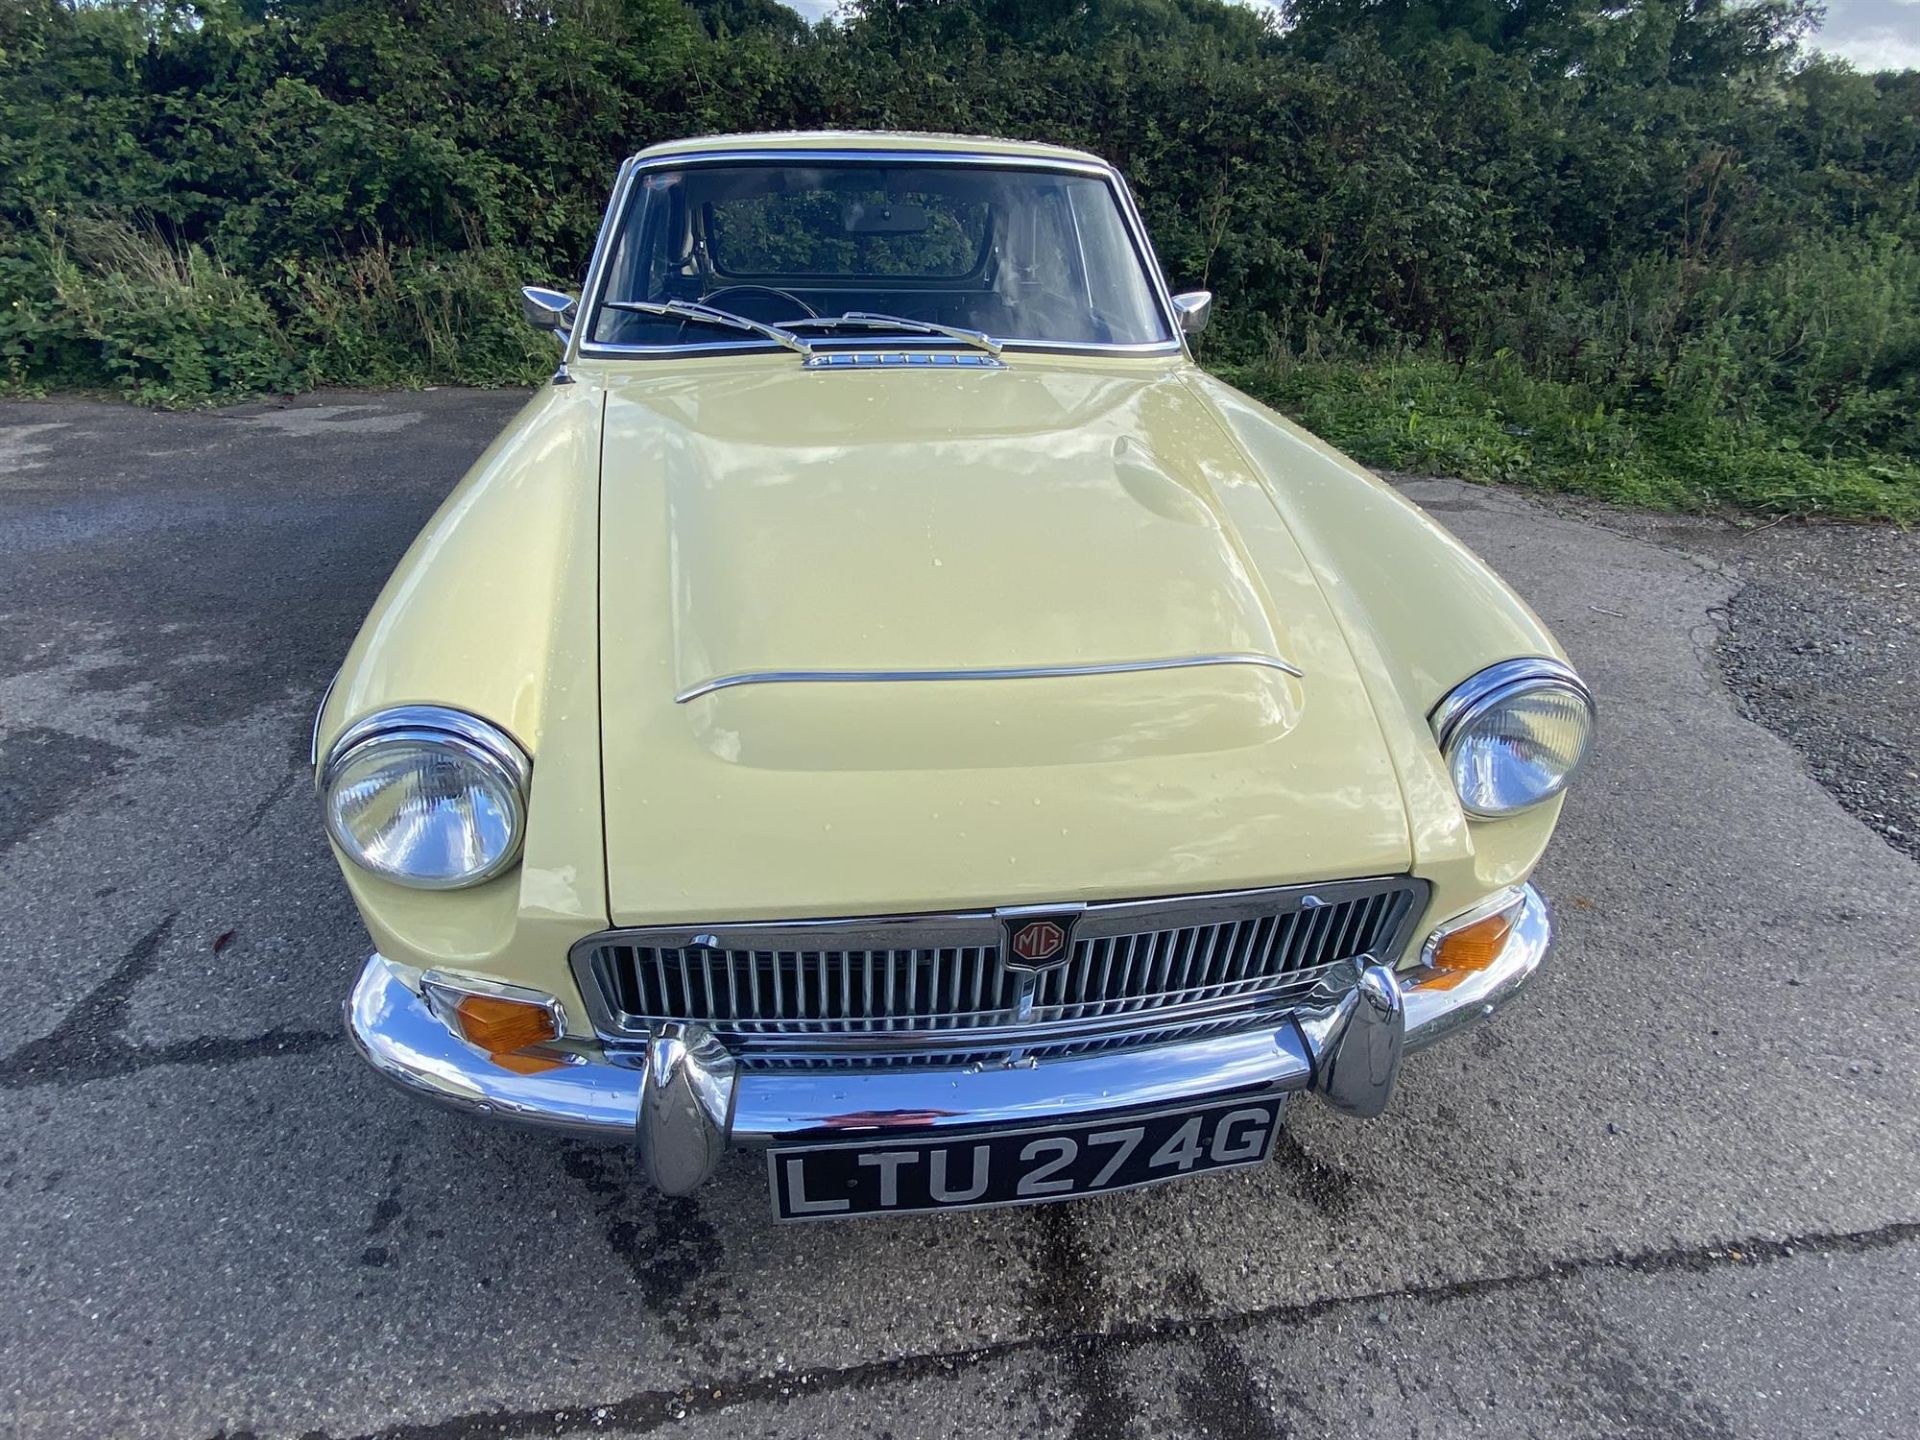 1969 MGC GT. Registration number: LTU 274G - Finished in Primrose yellow, with full black leather - Image 17 of 22